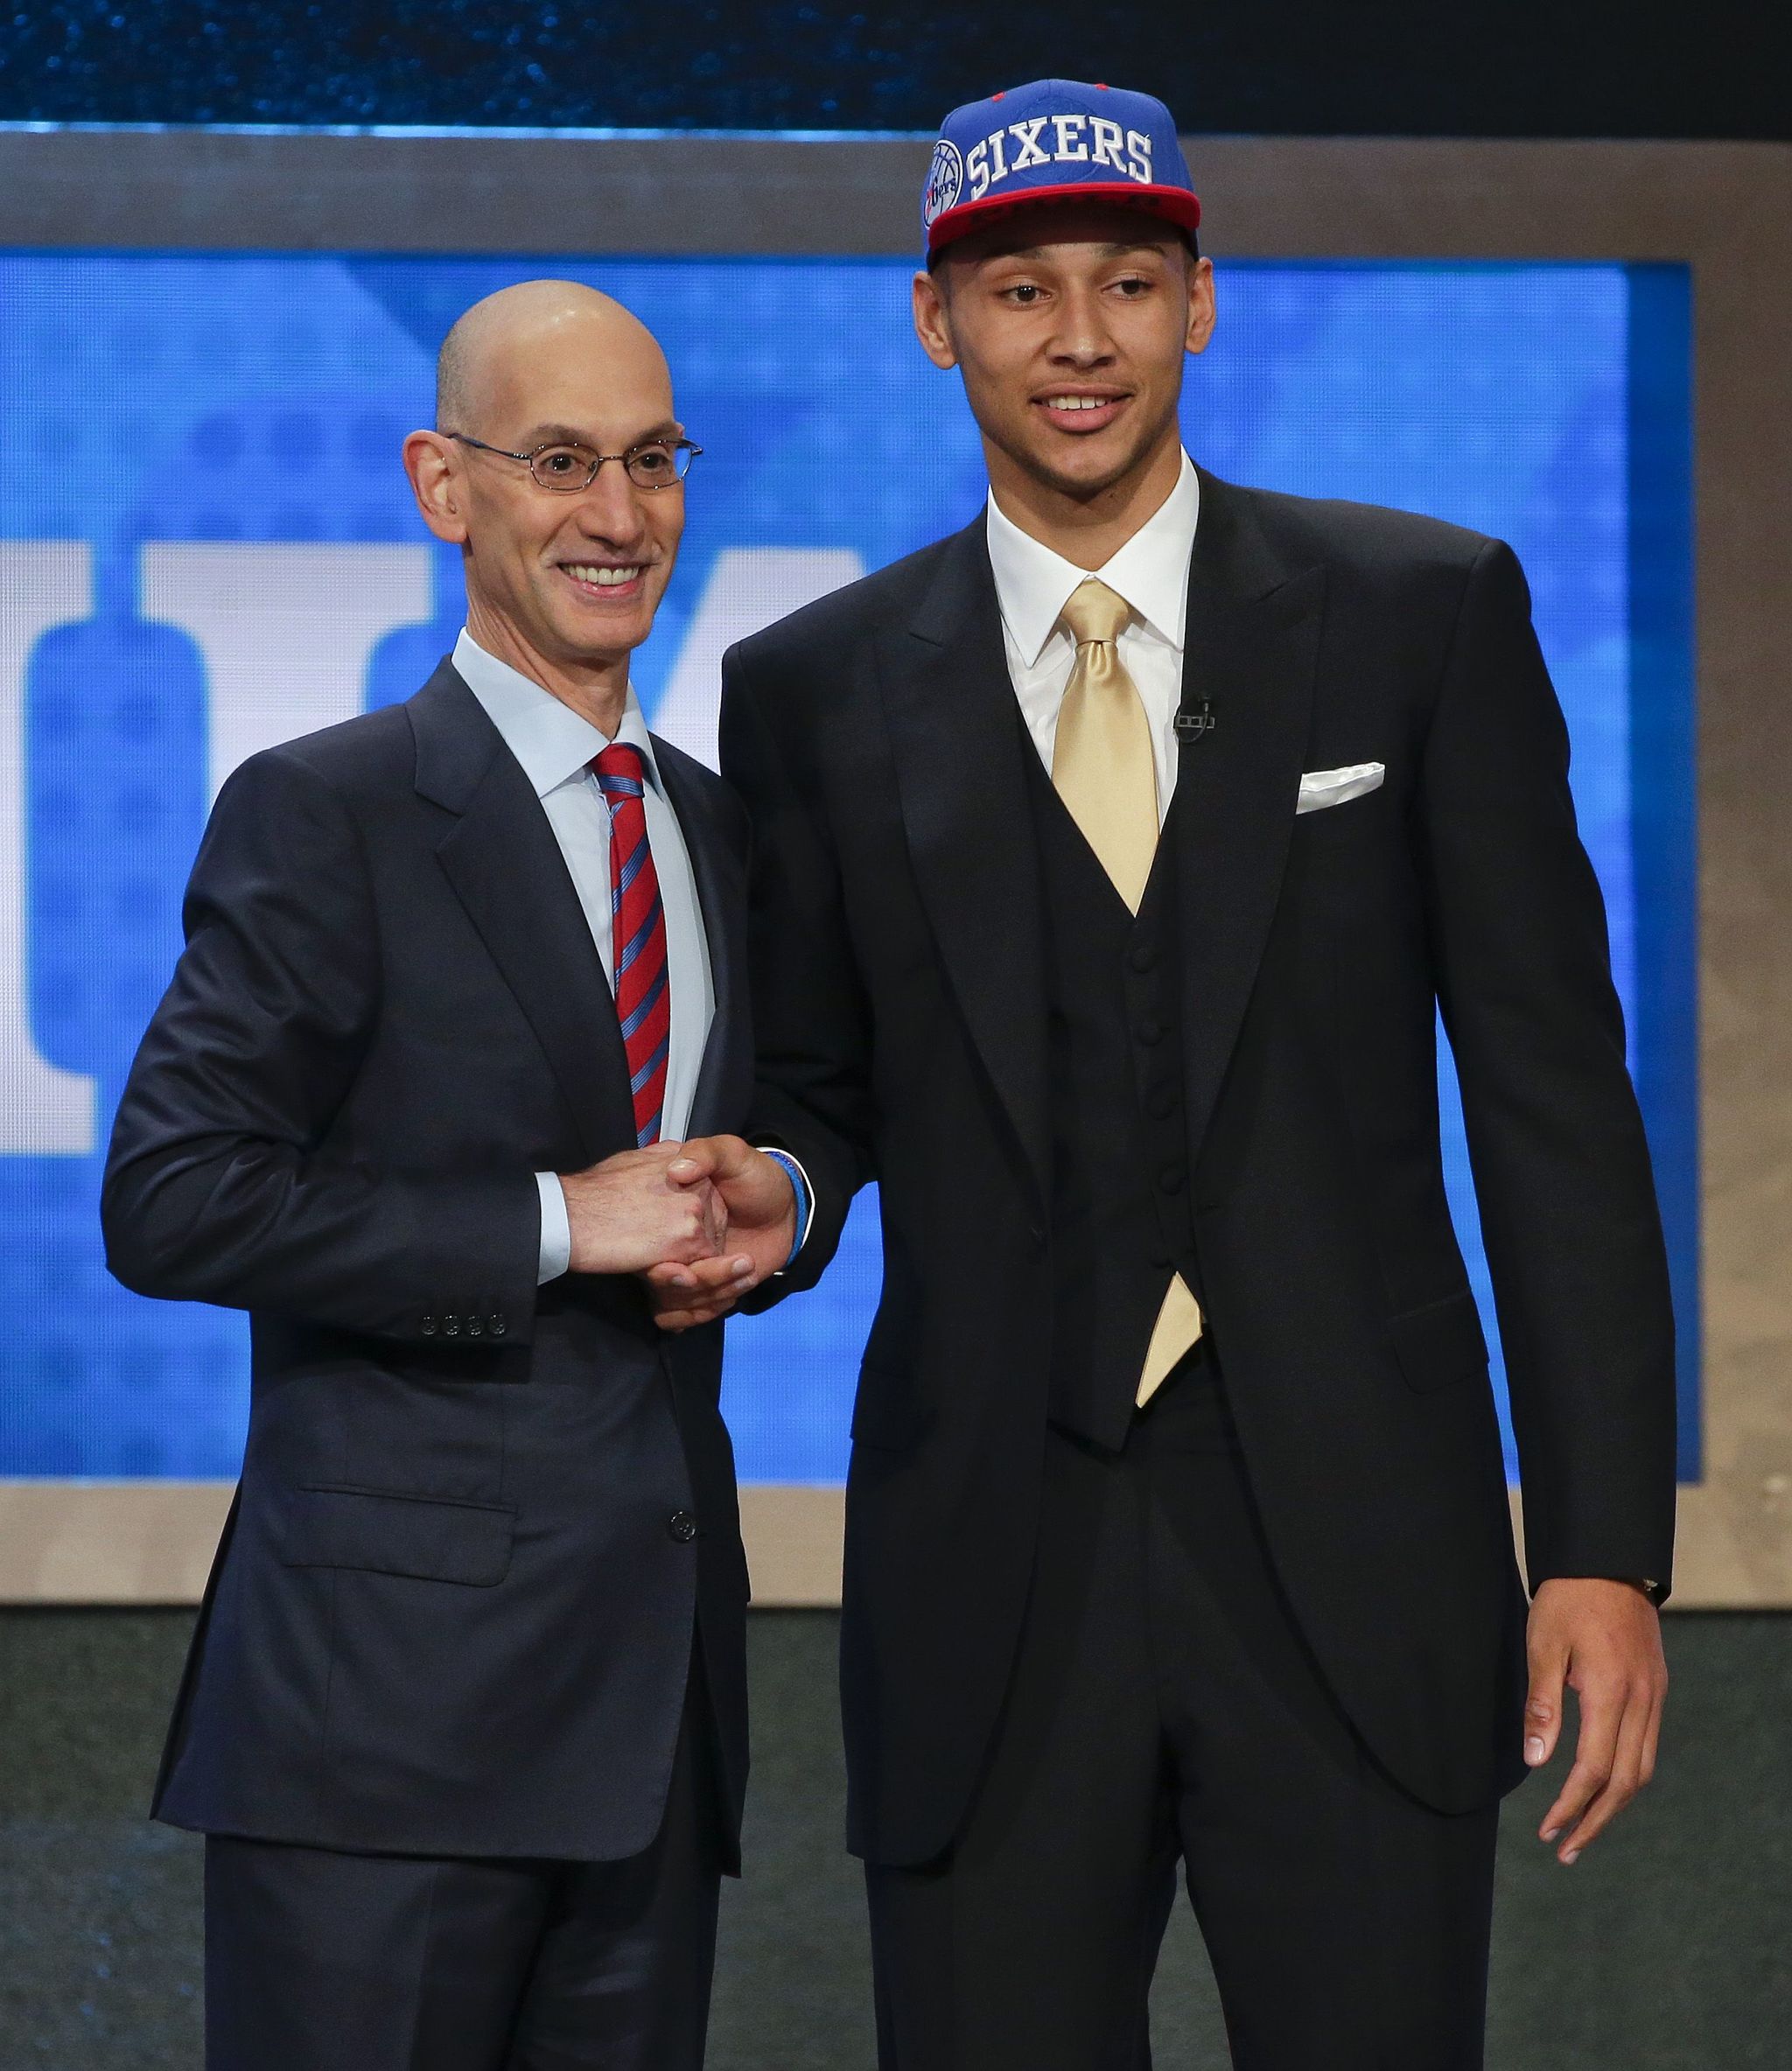 Ben Simmons poses with NBA Commissioner Adam Silver after being selected as the top overall pick by the Philadelphia 76ers during the NBA draft Thursday in New York.